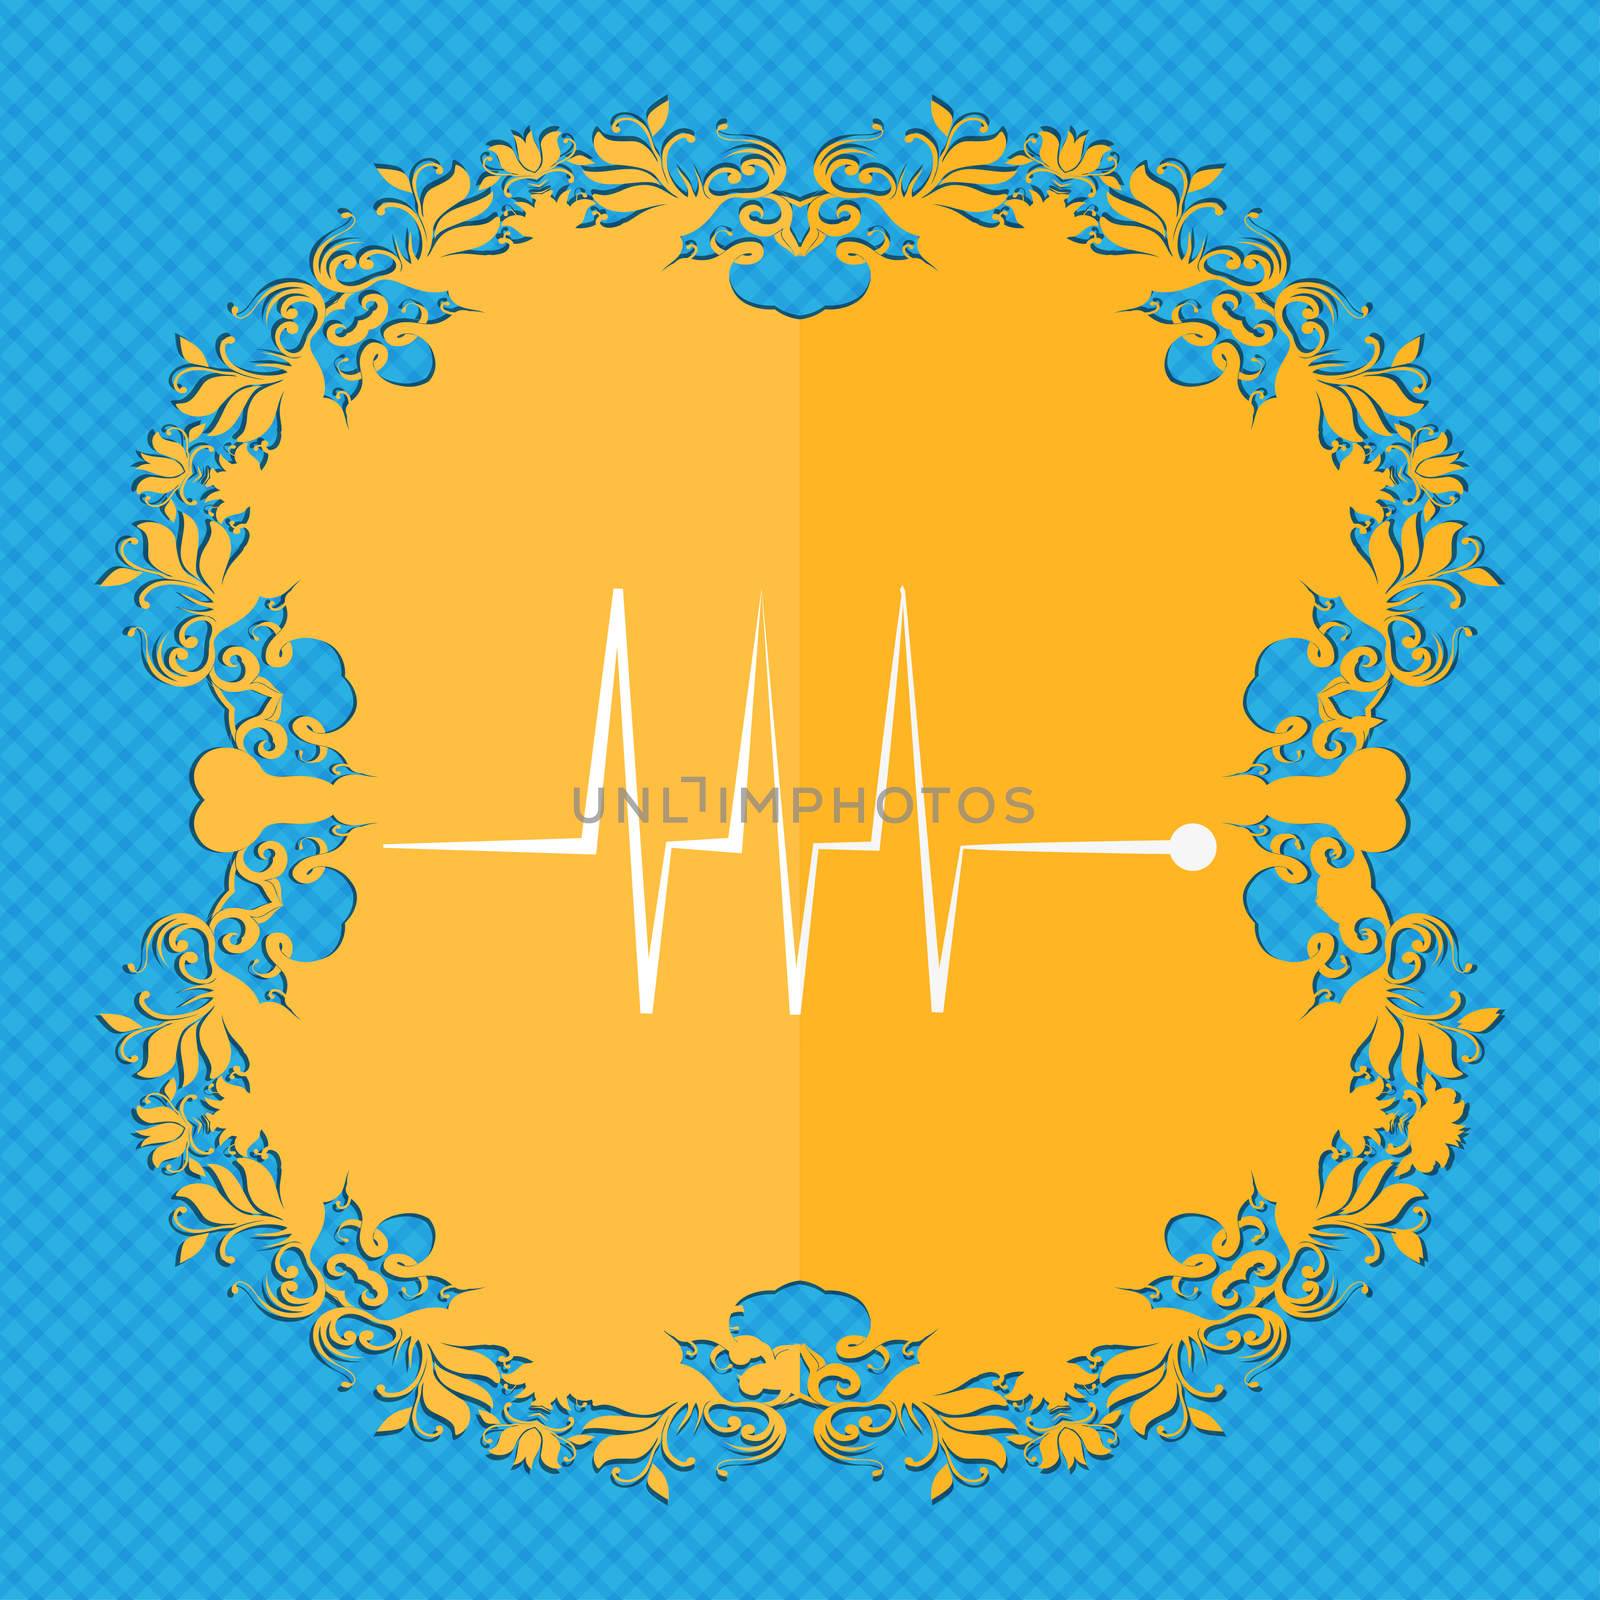 Cardiogram monitoring sign icon. Heart beats symbol. Floral flat design on a blue abstract background with place for your text.  by serhii_lohvyniuk